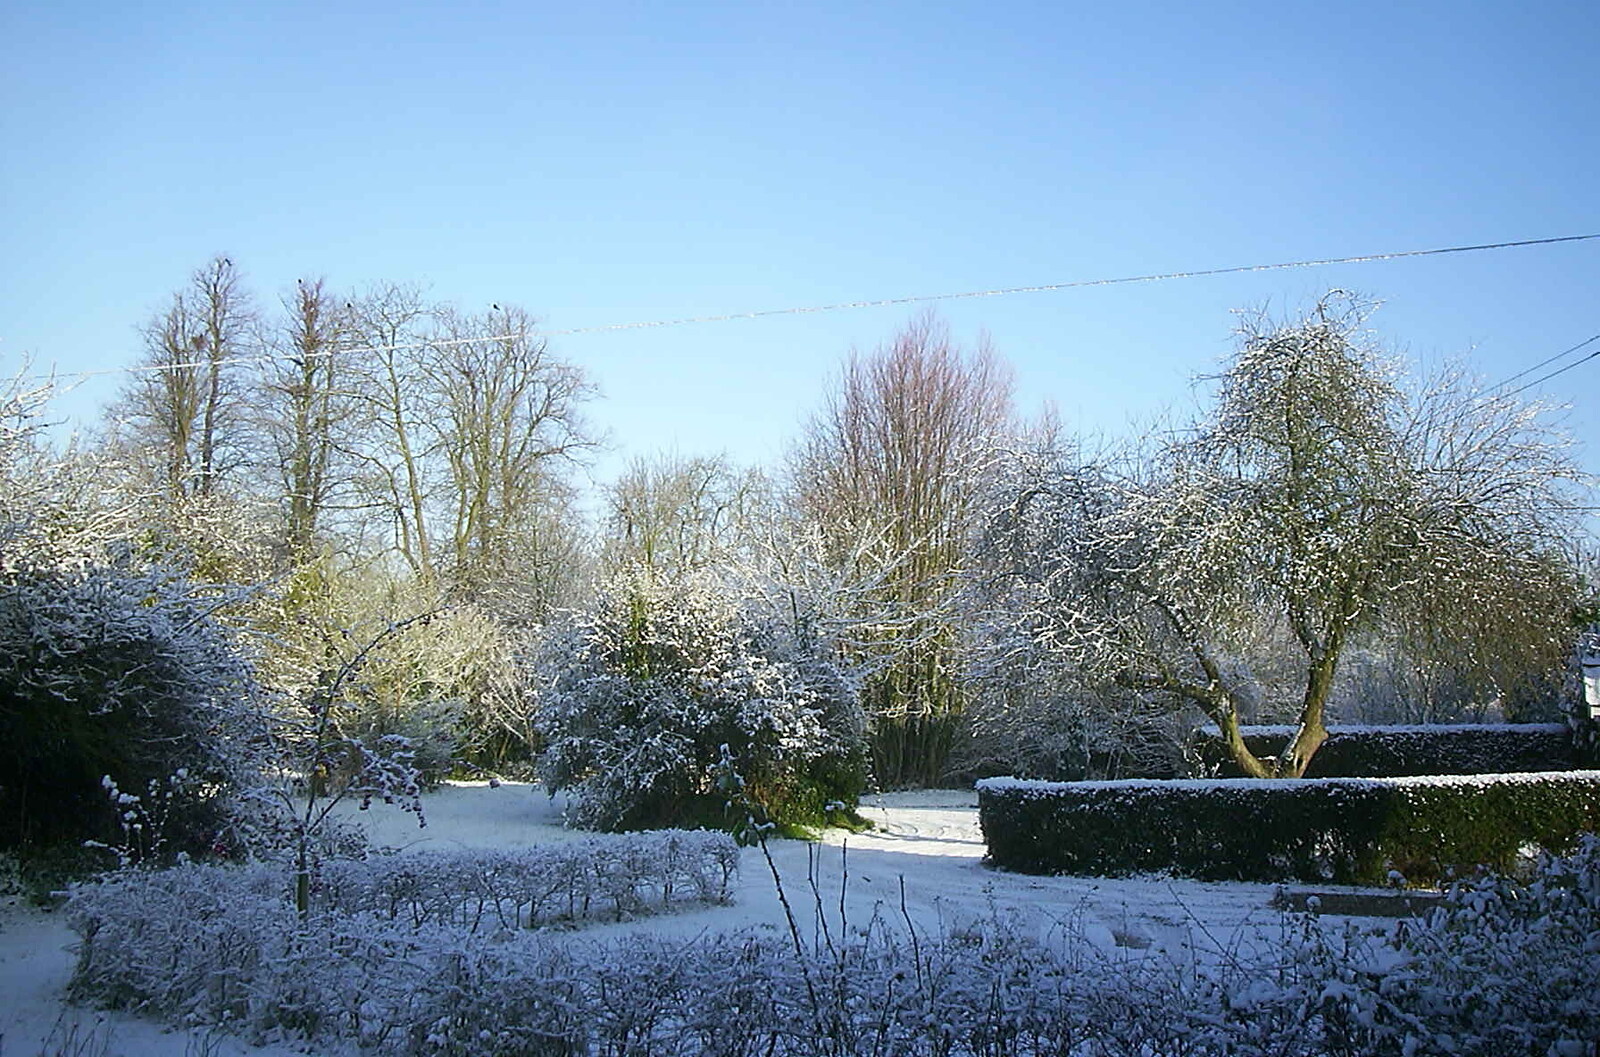 There's a bit of snow in the garden from The House in Snow and a Carburettor, Brome, Suffolk - 20th December 2002